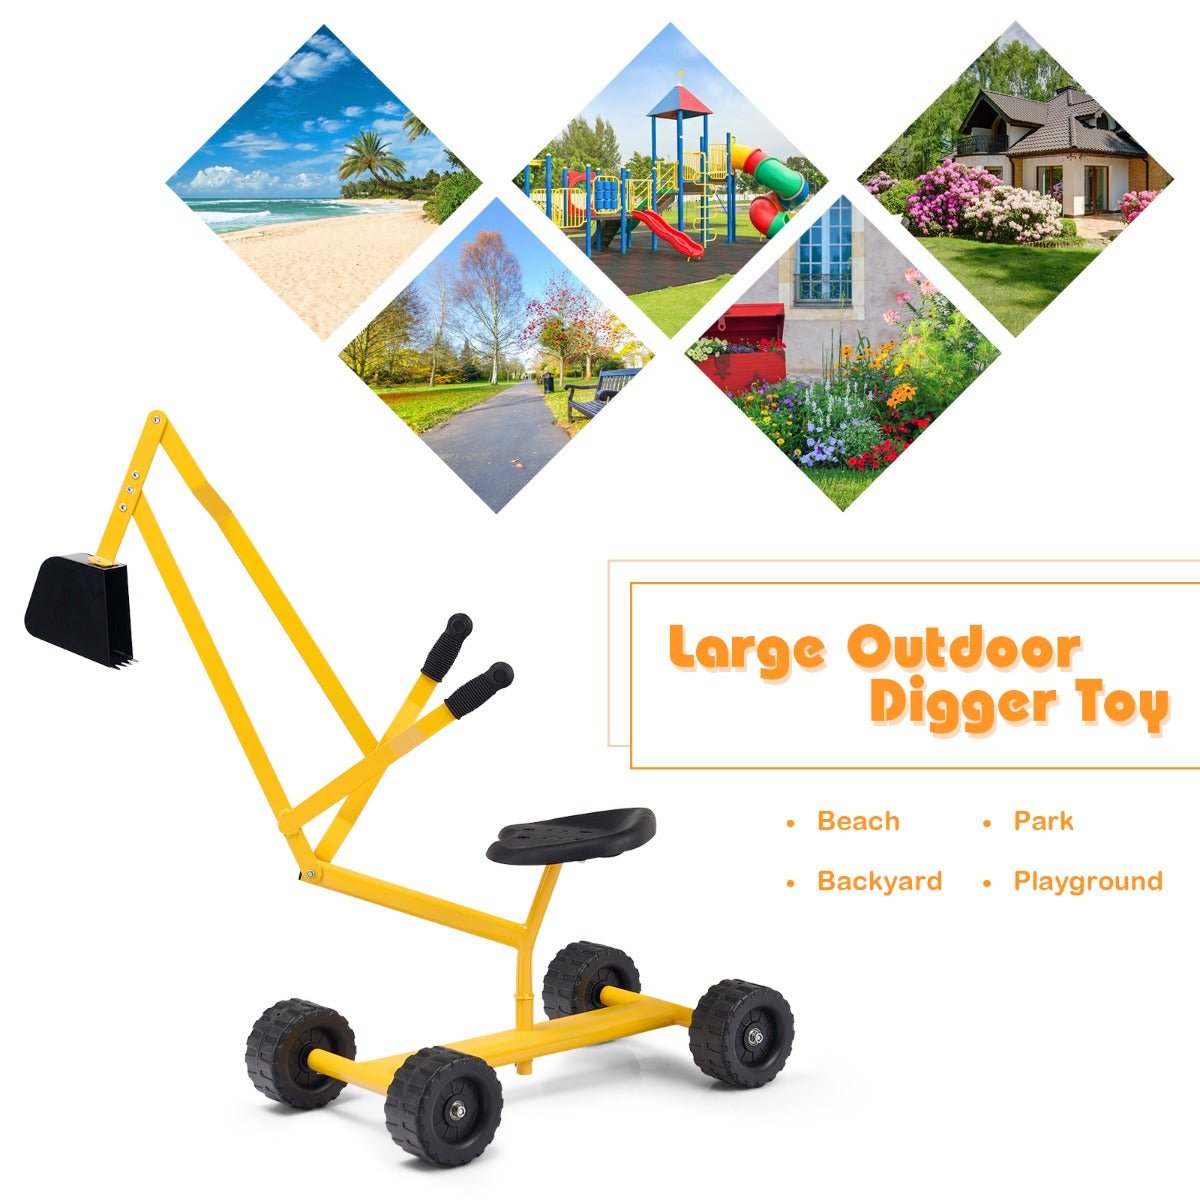 Get the Best Yellow Sand Digger for Kids - Order Now!